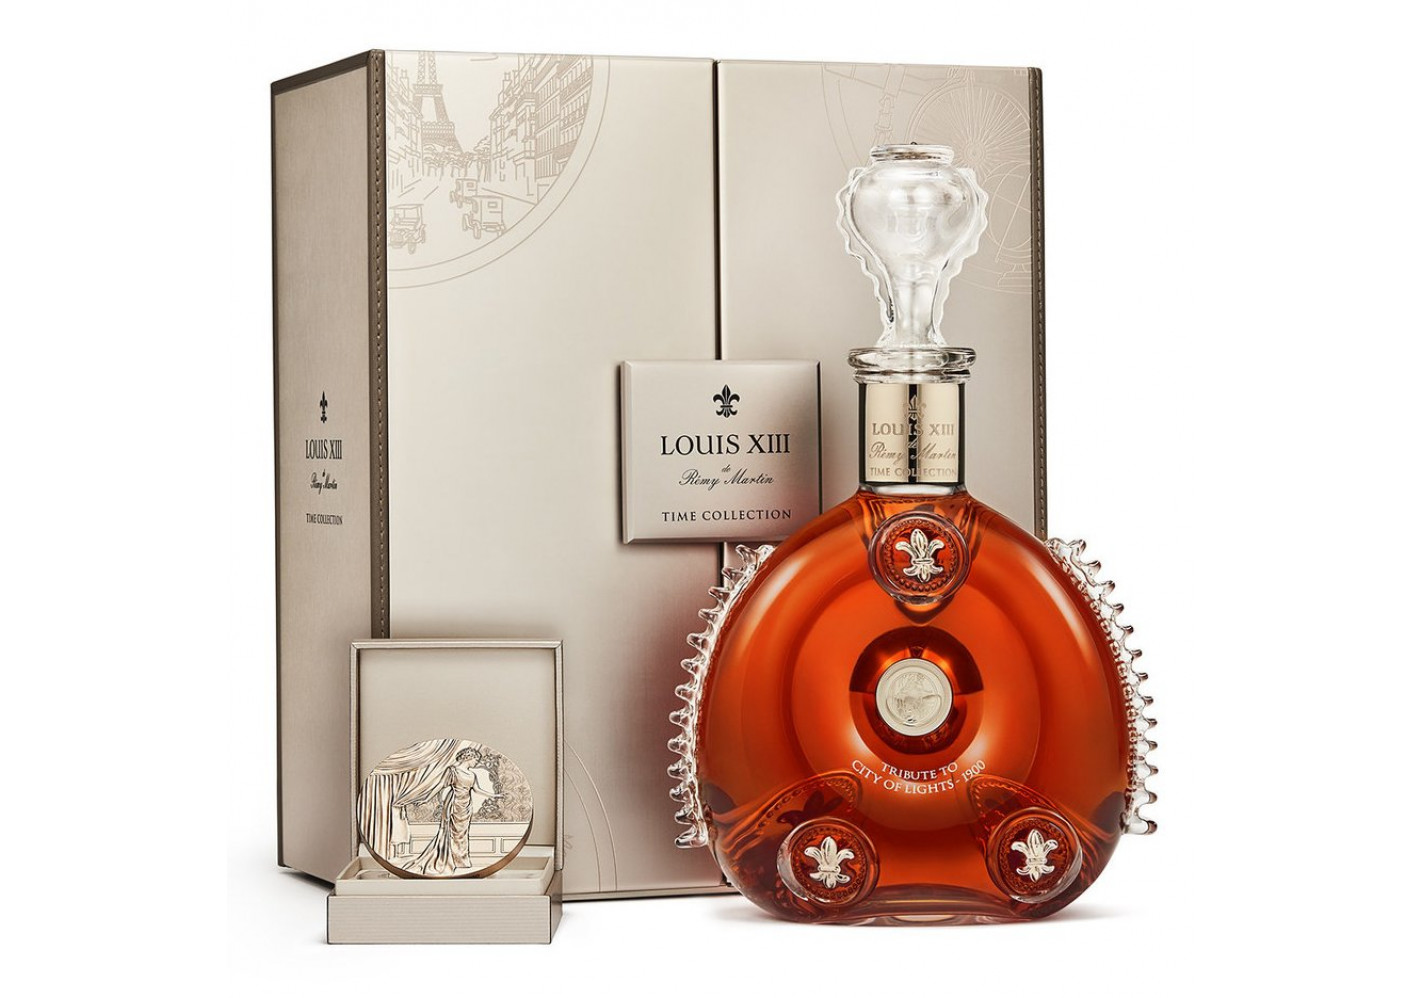 Remy Martin Louis Xiii Time Collection Cognac 